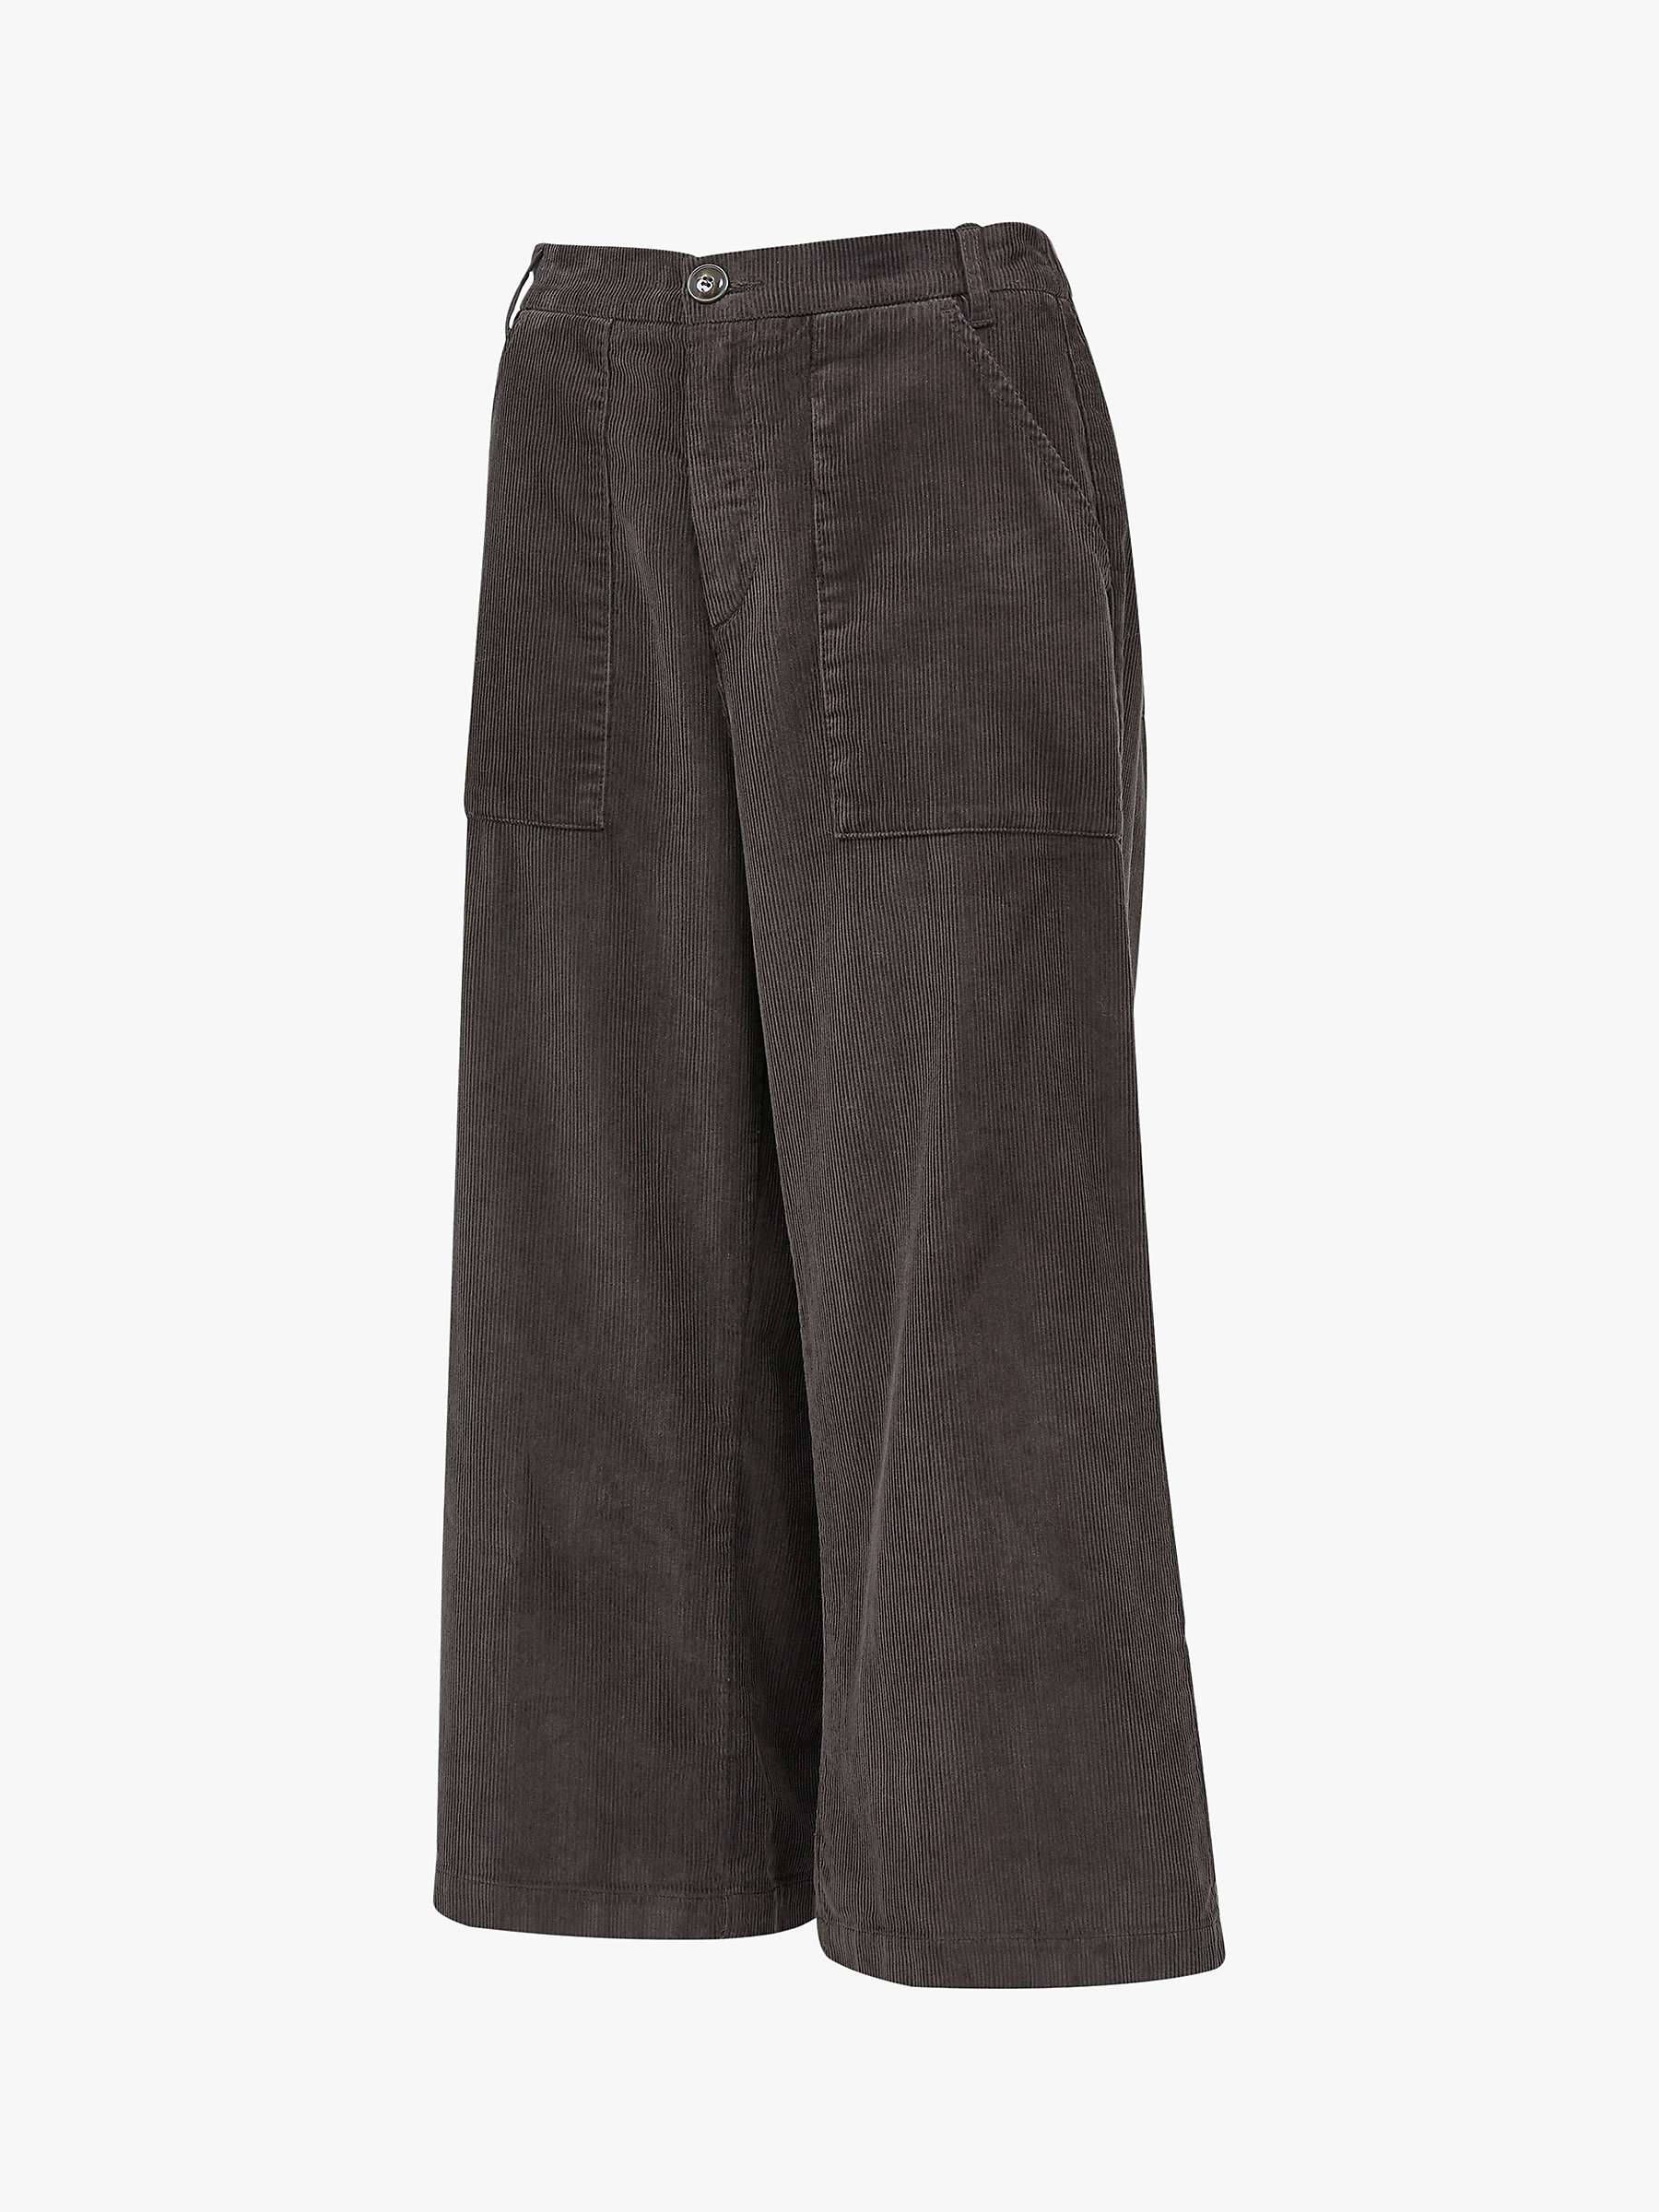 Buy Celtic & Co. Organic Cotton Cord Wide Crop Trousers, Ebony Online at johnlewis.com